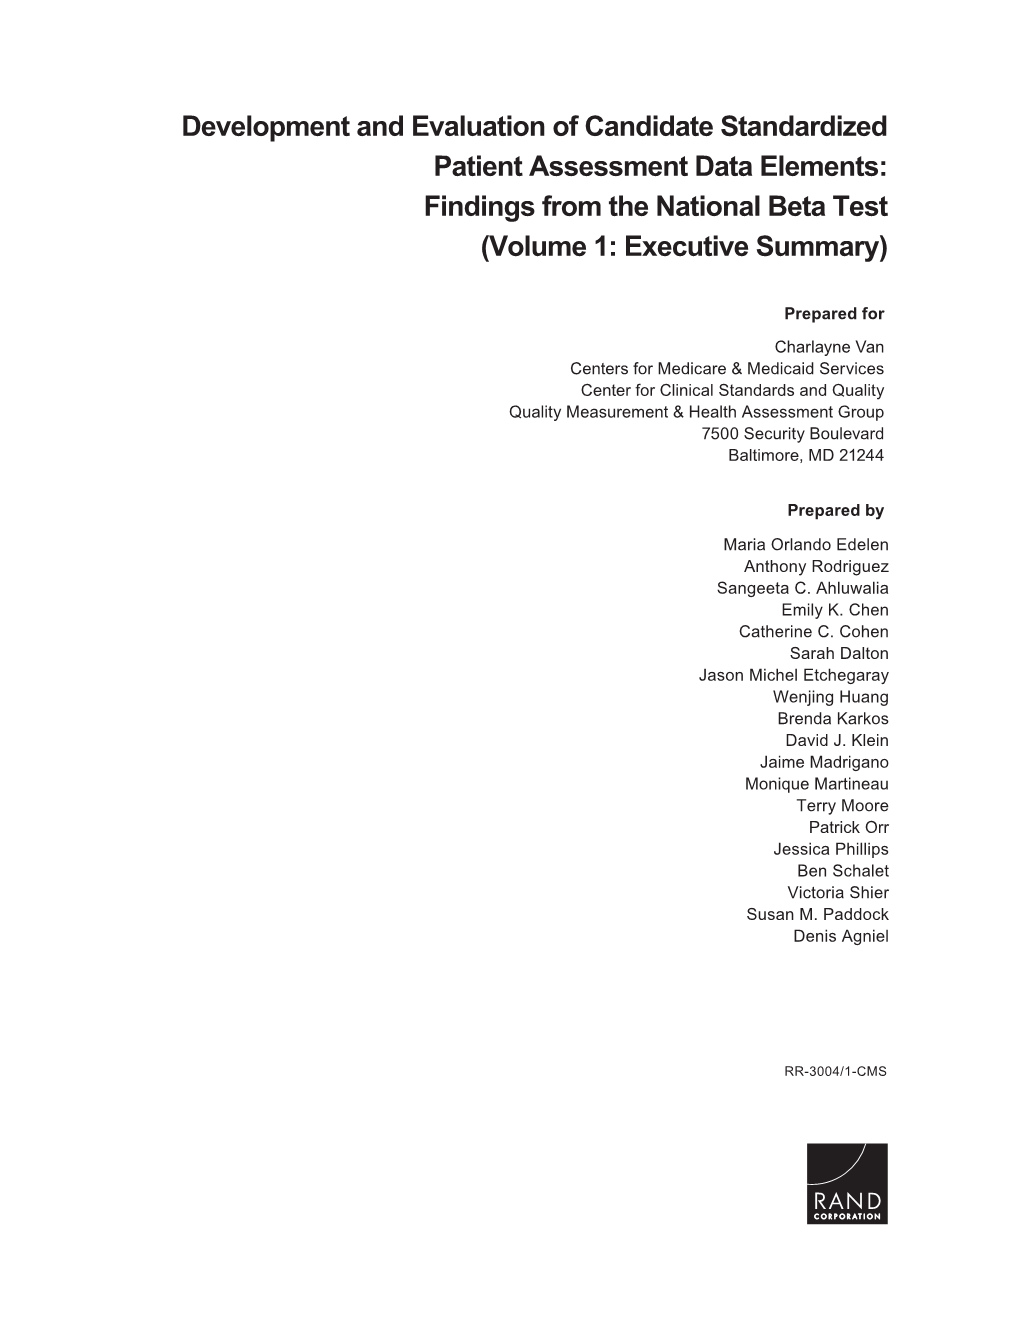 Development and Evaluation of Candidate Standardized Patient Assessment Data Elements: Findings from the National Beta Test (Volume 1: Executive Summary)